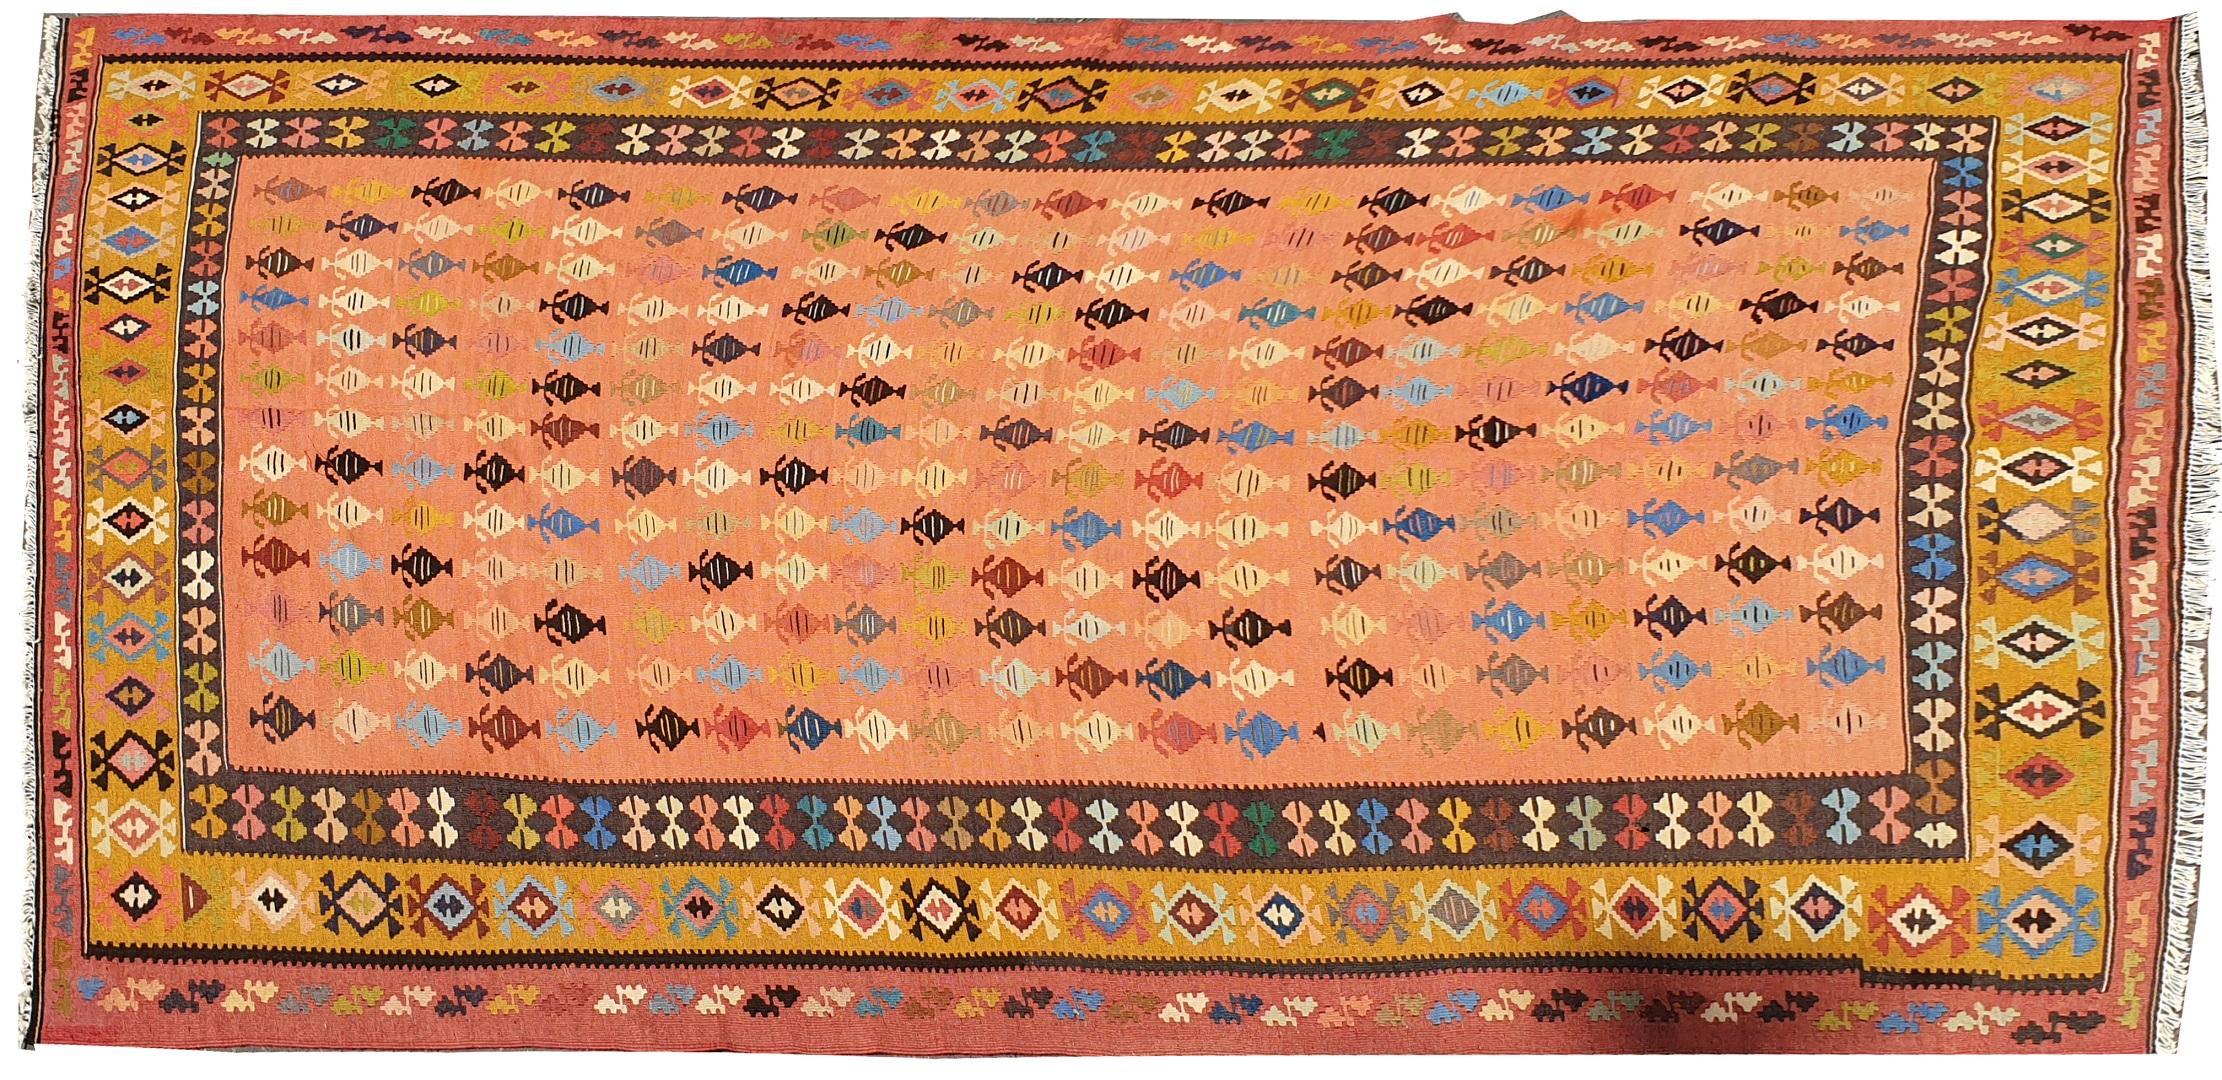 758 - nice 20th century Kilim from Azerbaijan with beautiful pattern, and beautiful colors pink, orange, yellow, green and dark brown, entirely hand-woven with wool woven on cotton foundation.